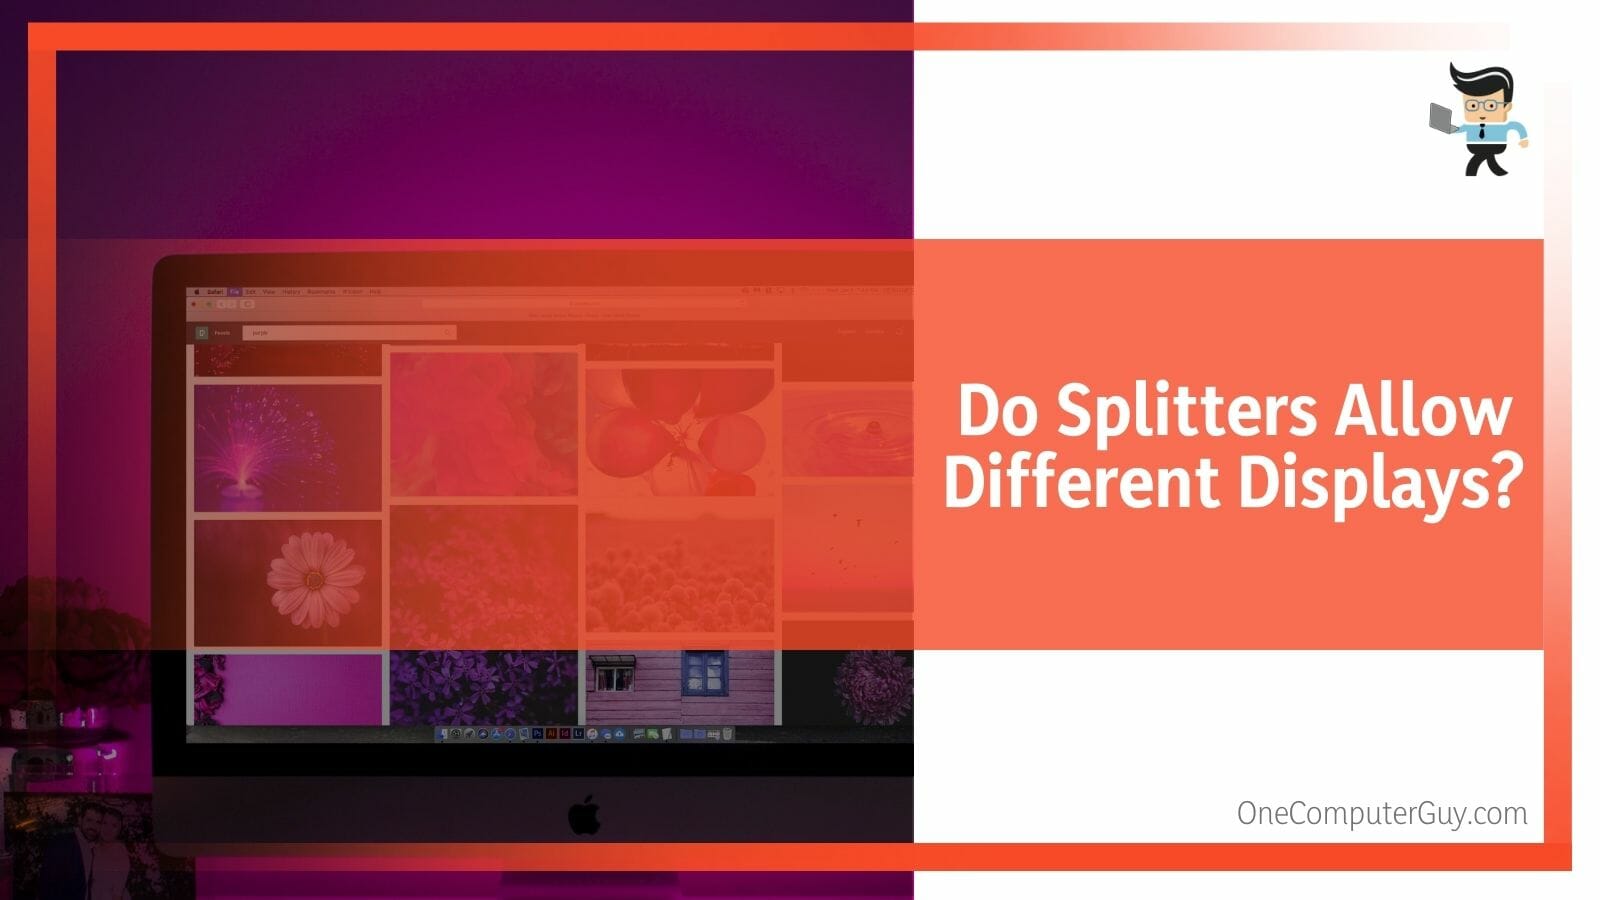 Do Splitters Allow Different Displays